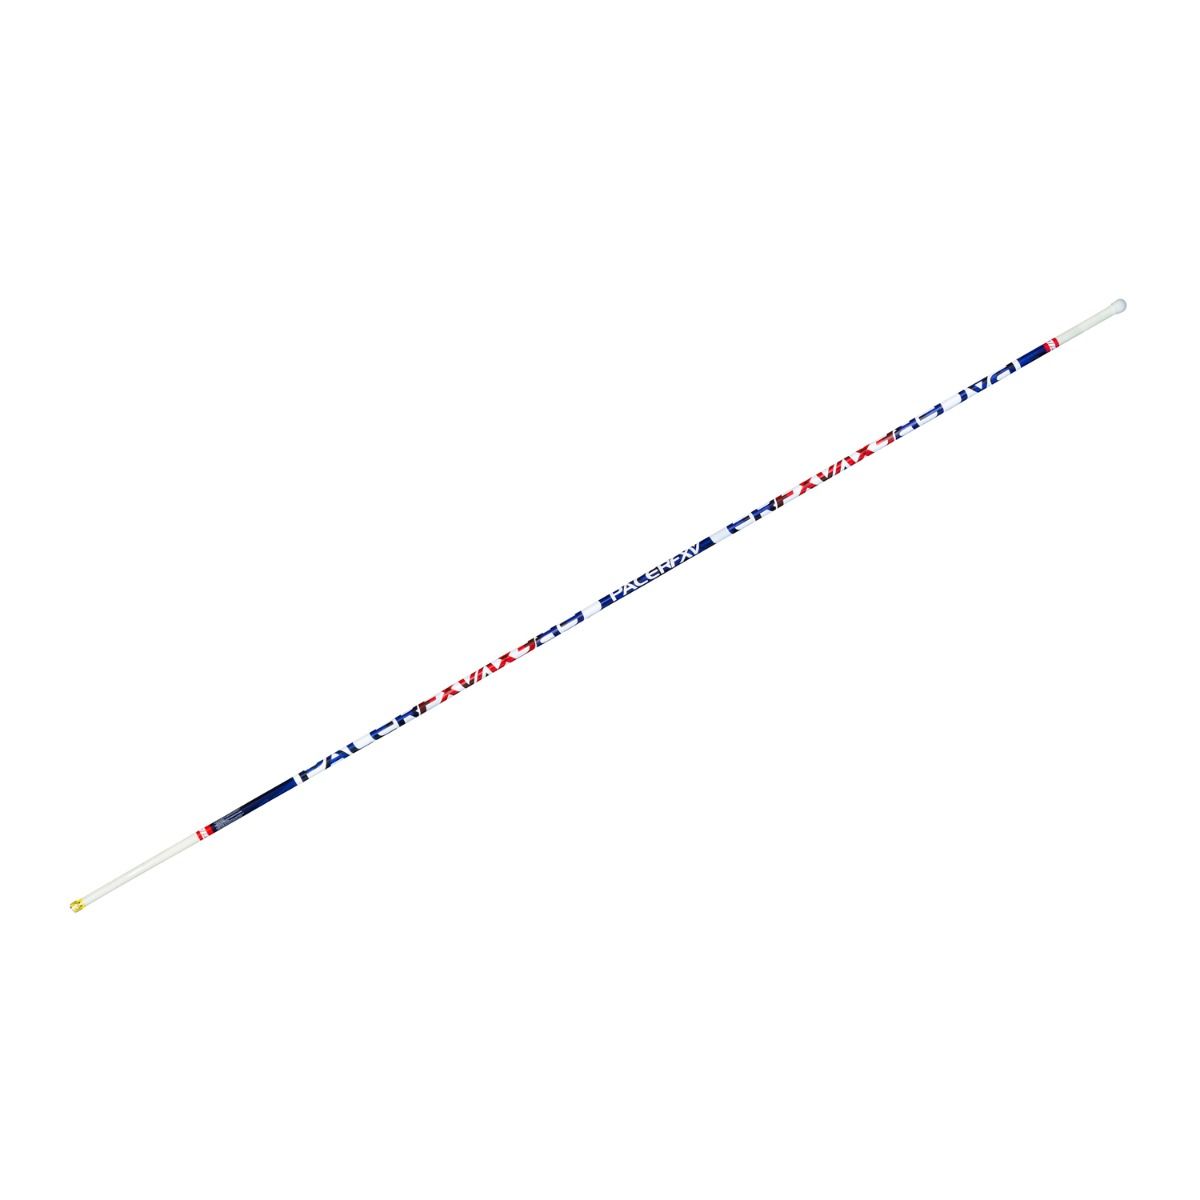 Gill PacerFXV 11' 6" Vaulting Pole